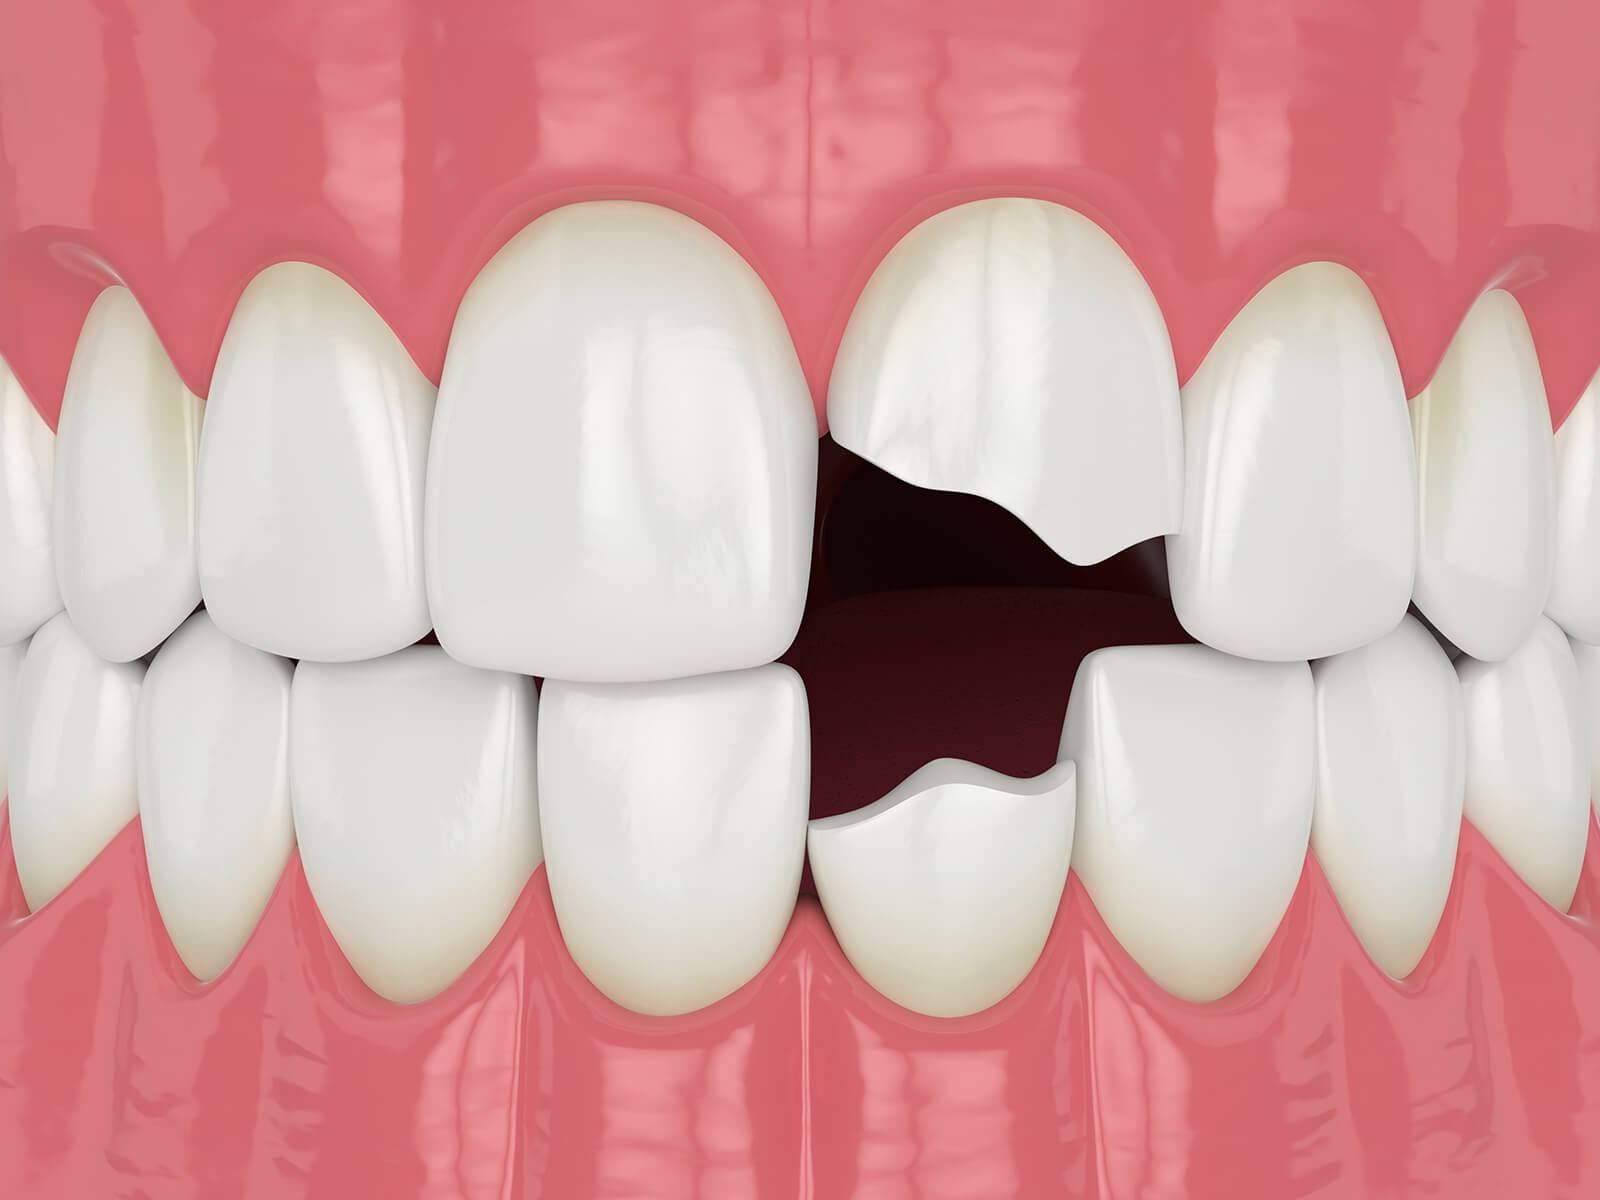 What Happens To Tooth Enamel With A Chipped Tooth?